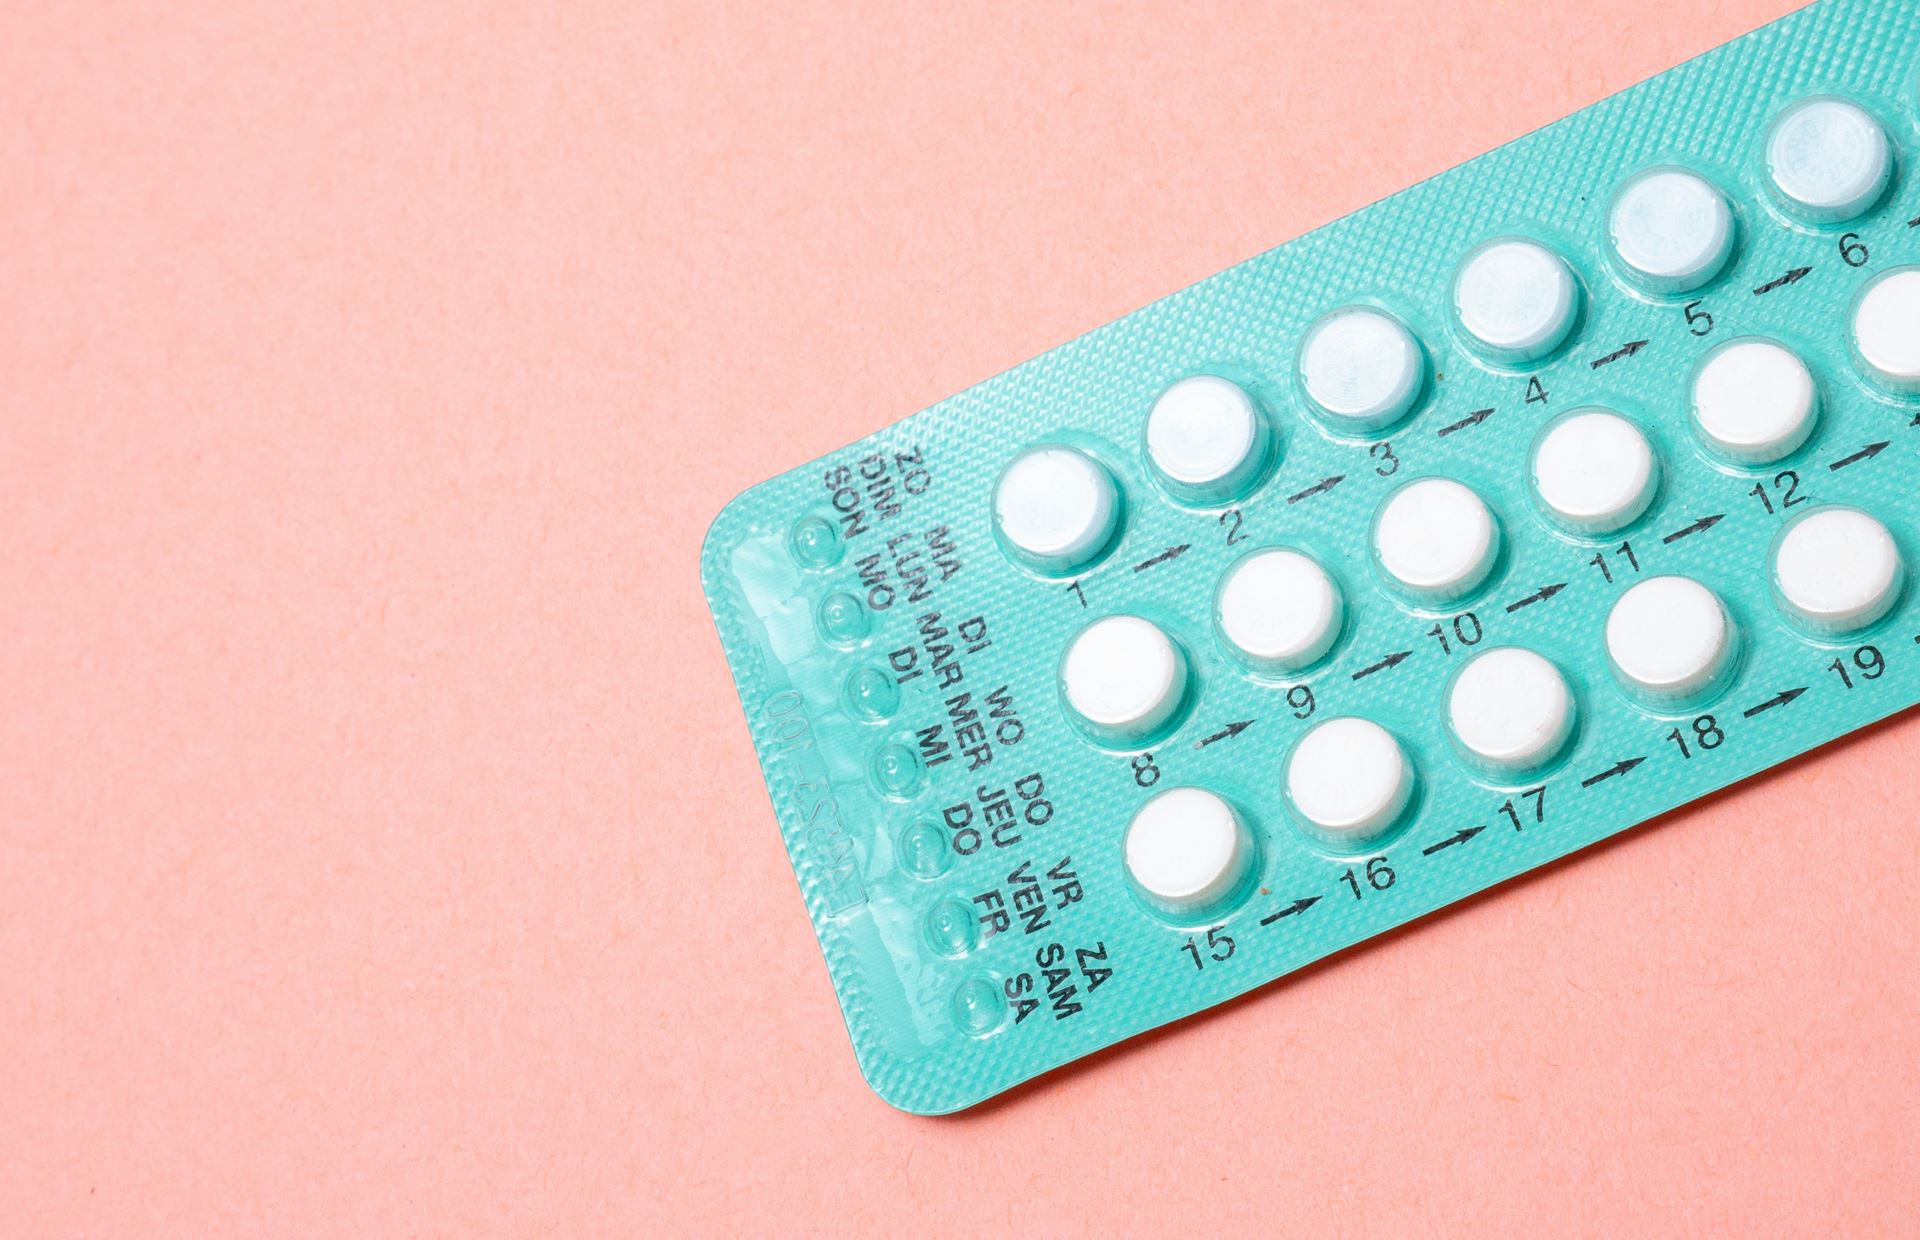 A pack of the contraceptive pill on a pink background